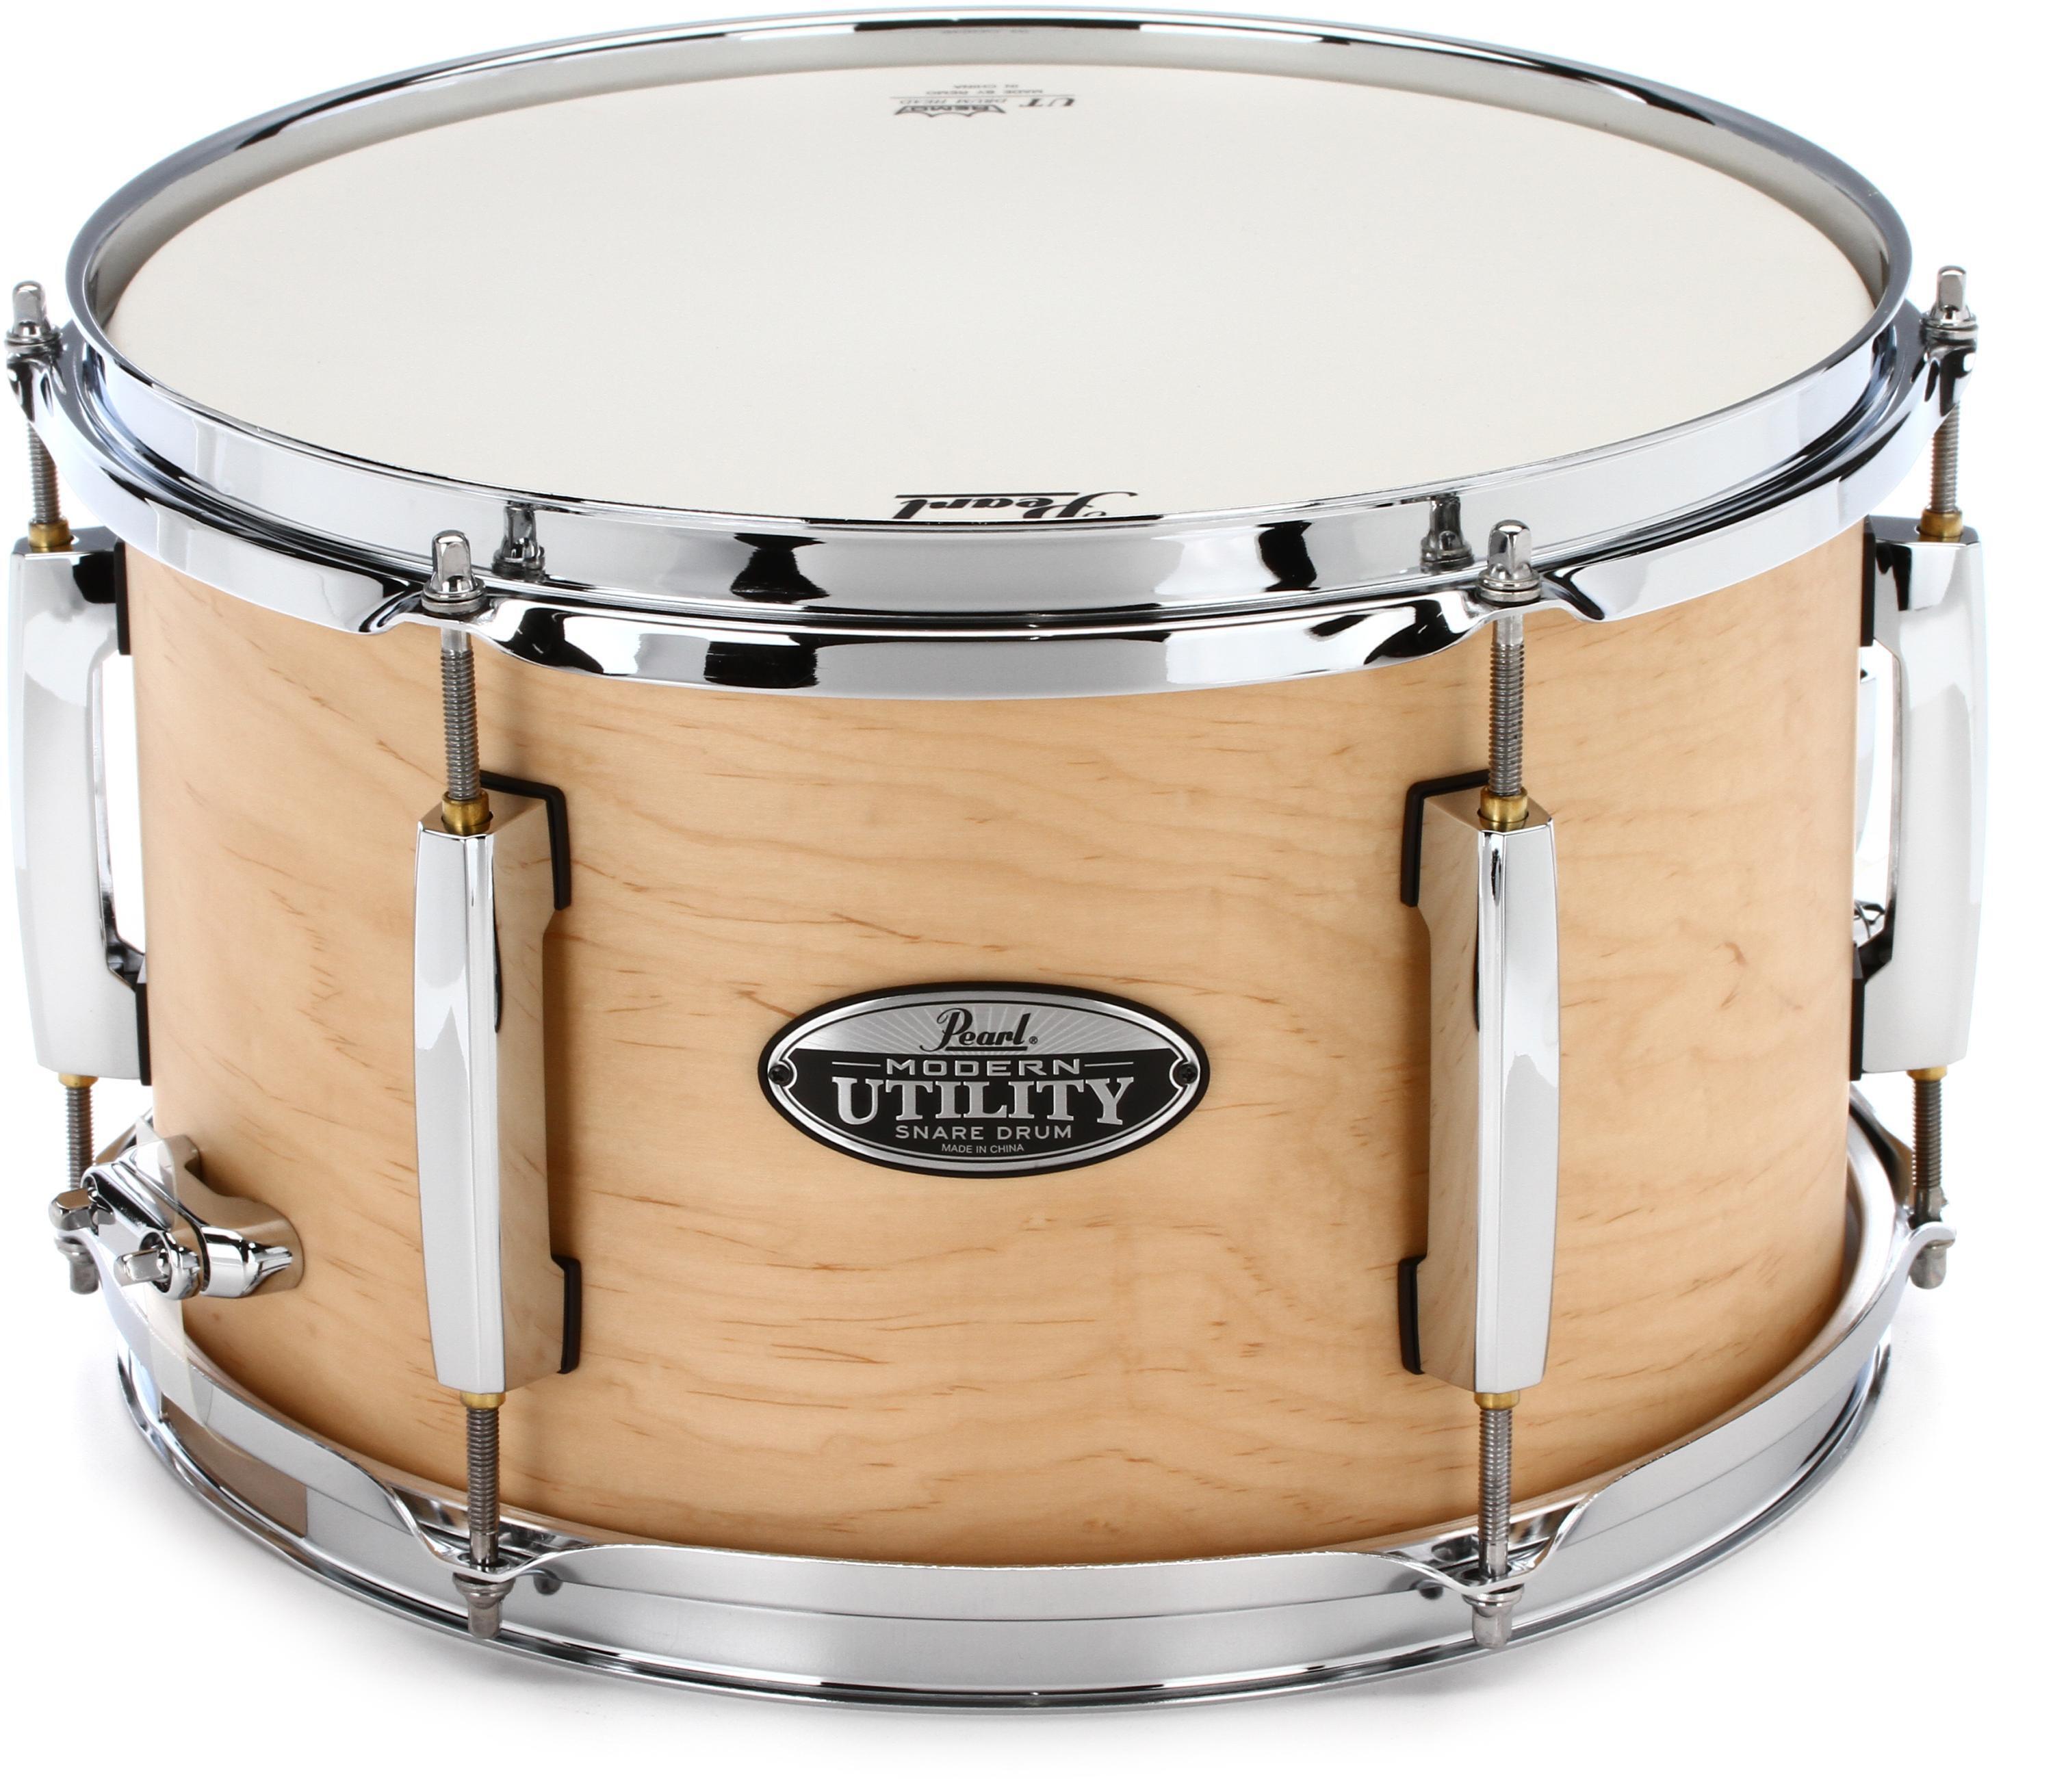 Pearl Modern Utility Snare Drum - 12 x 7 inch - Satin Natural